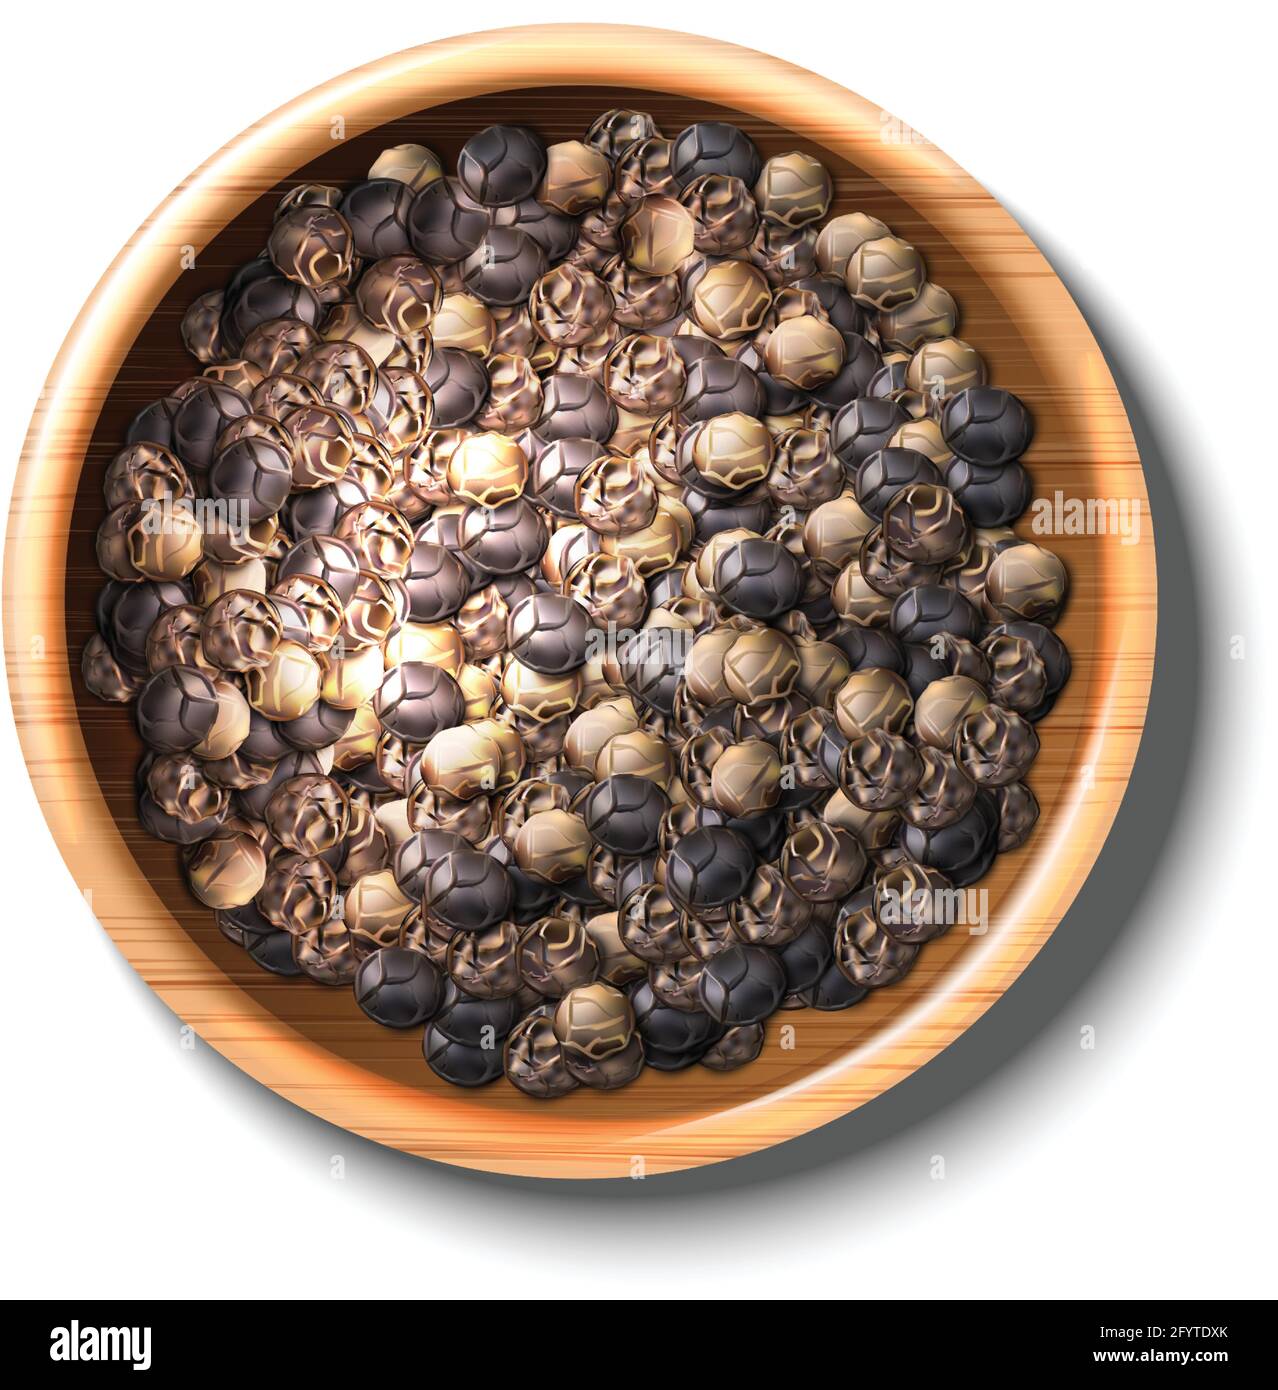 vector black pepper in a wooden bowl. Isolated on white background. Stock Vector